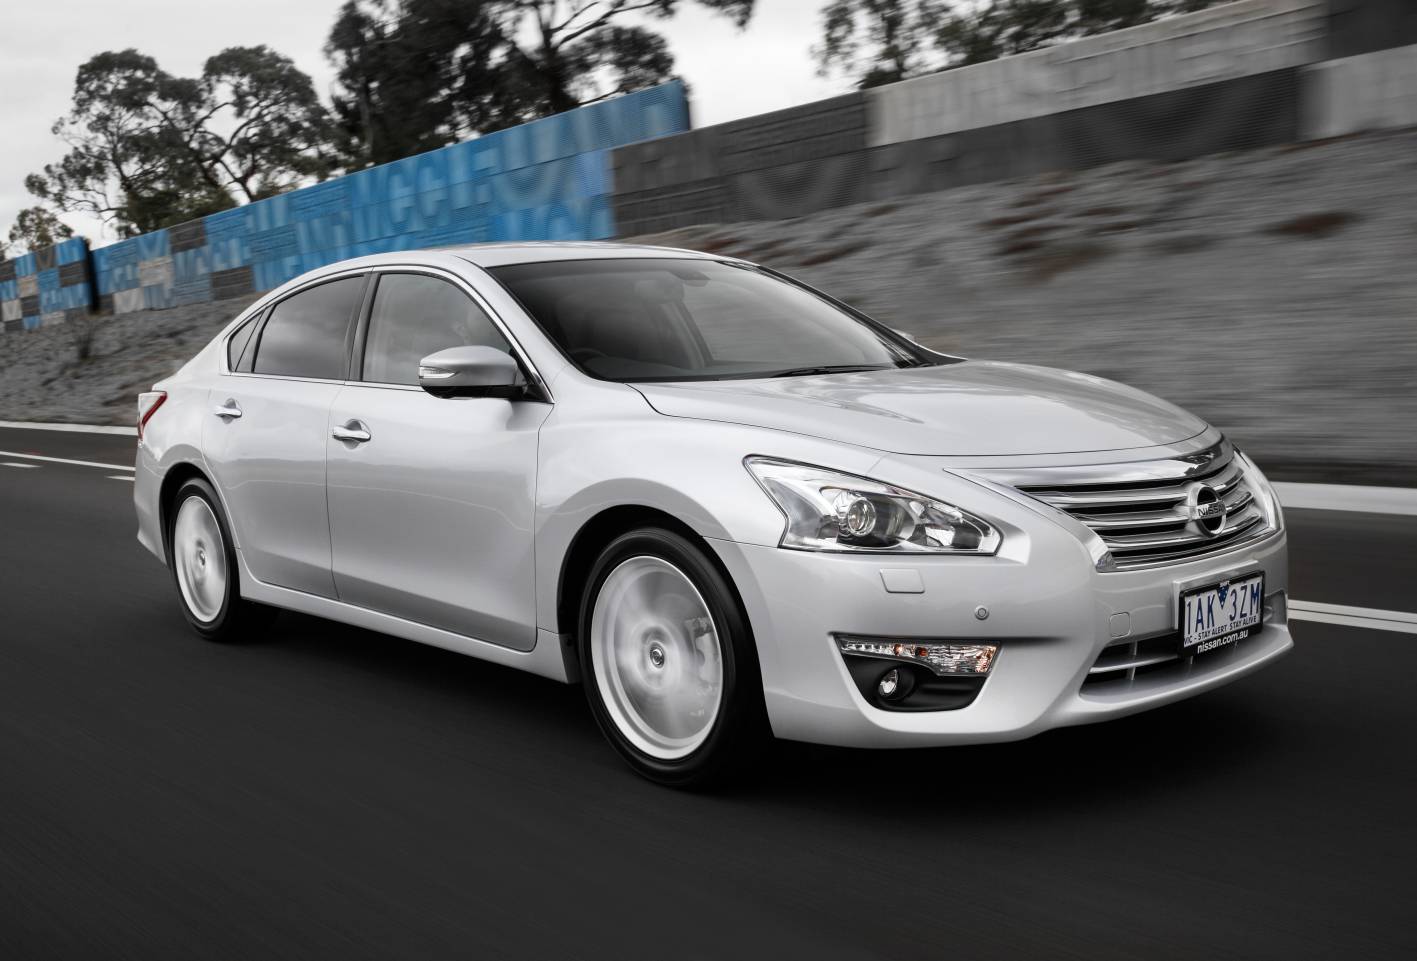 Nissan Altima on sale in Australia from $29,990